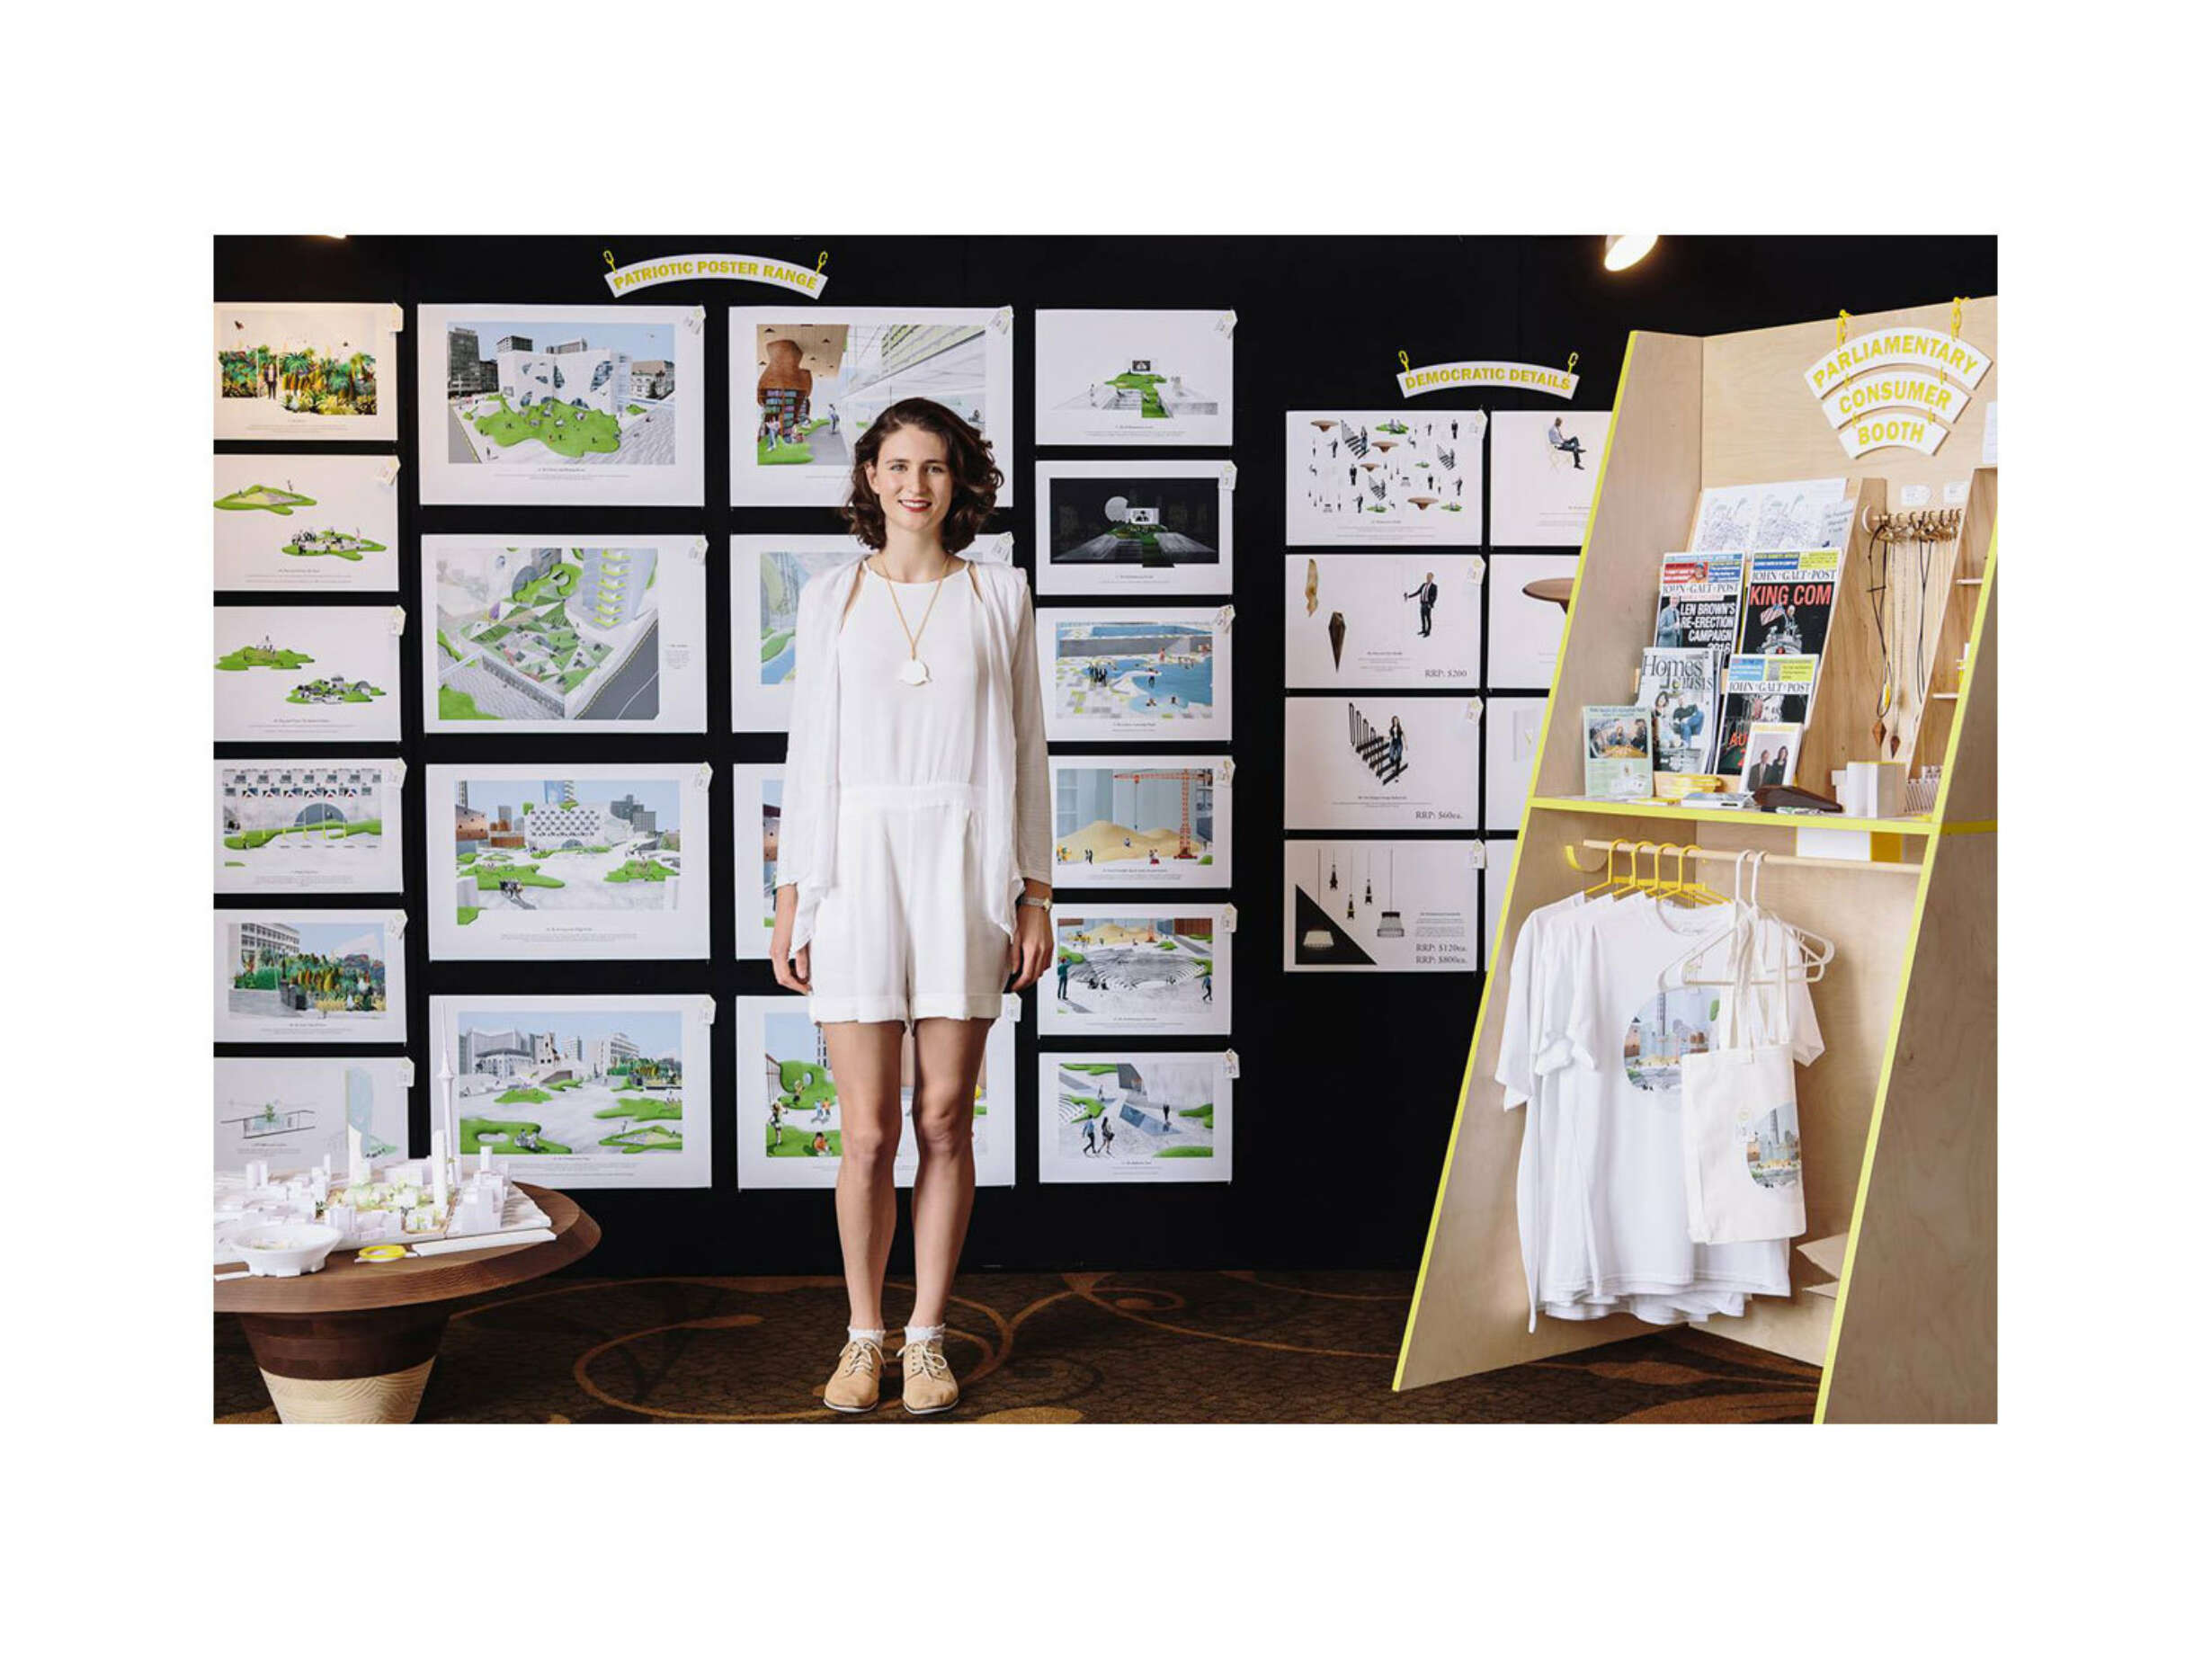 The project was presented as a full package, with the drawings, the model and the gift store - everything was for sale